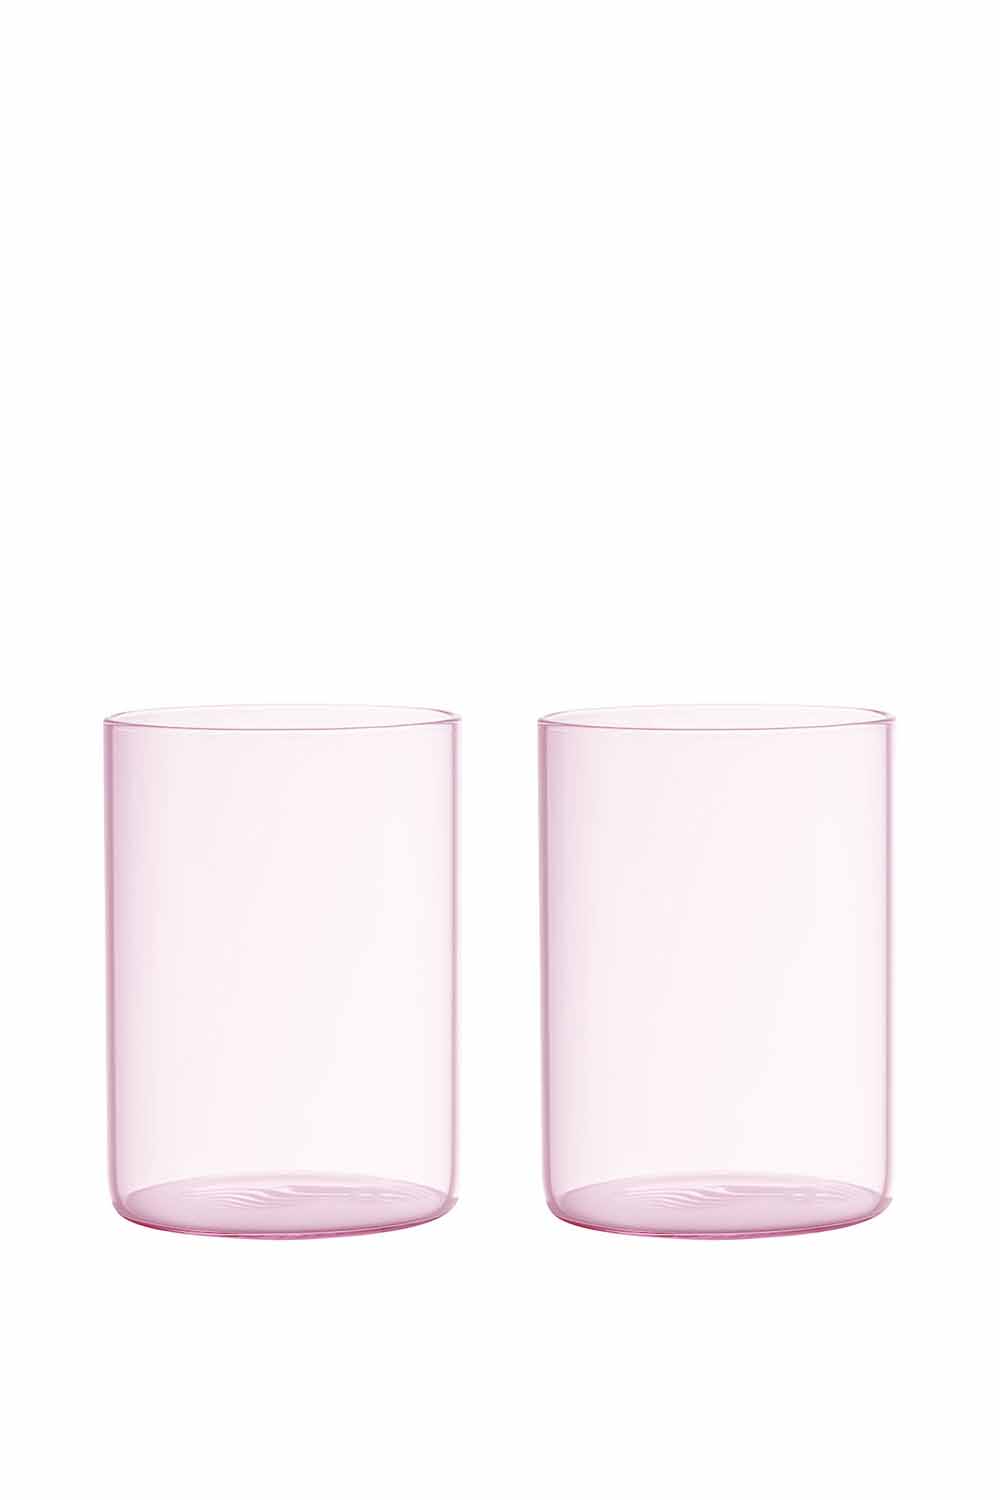 Favourite Drinking Glass, Pink, Set of 2